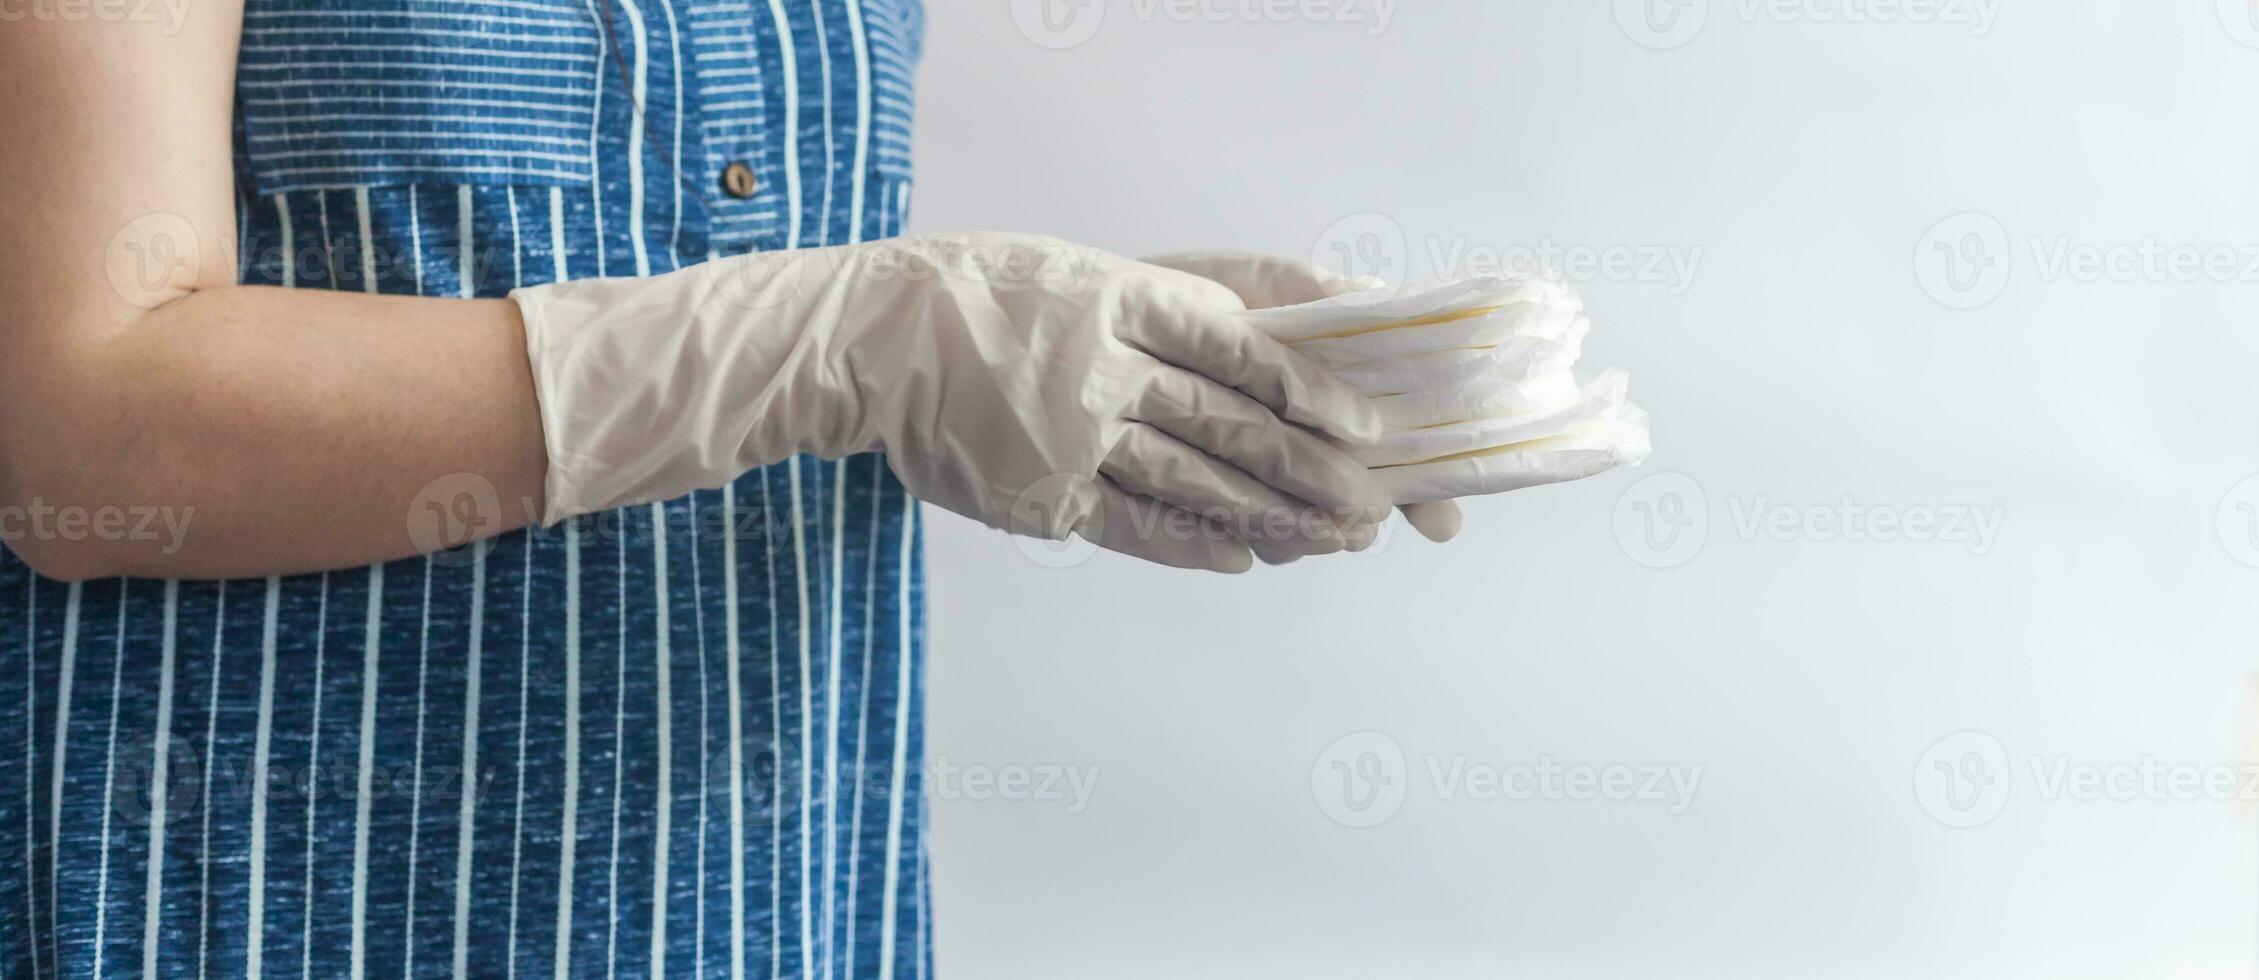 Female's hygiene products. Woman in medical gloves holding a stack of sanitary napkins against white background. Period days concept showing feminine menstrual cycle. photo